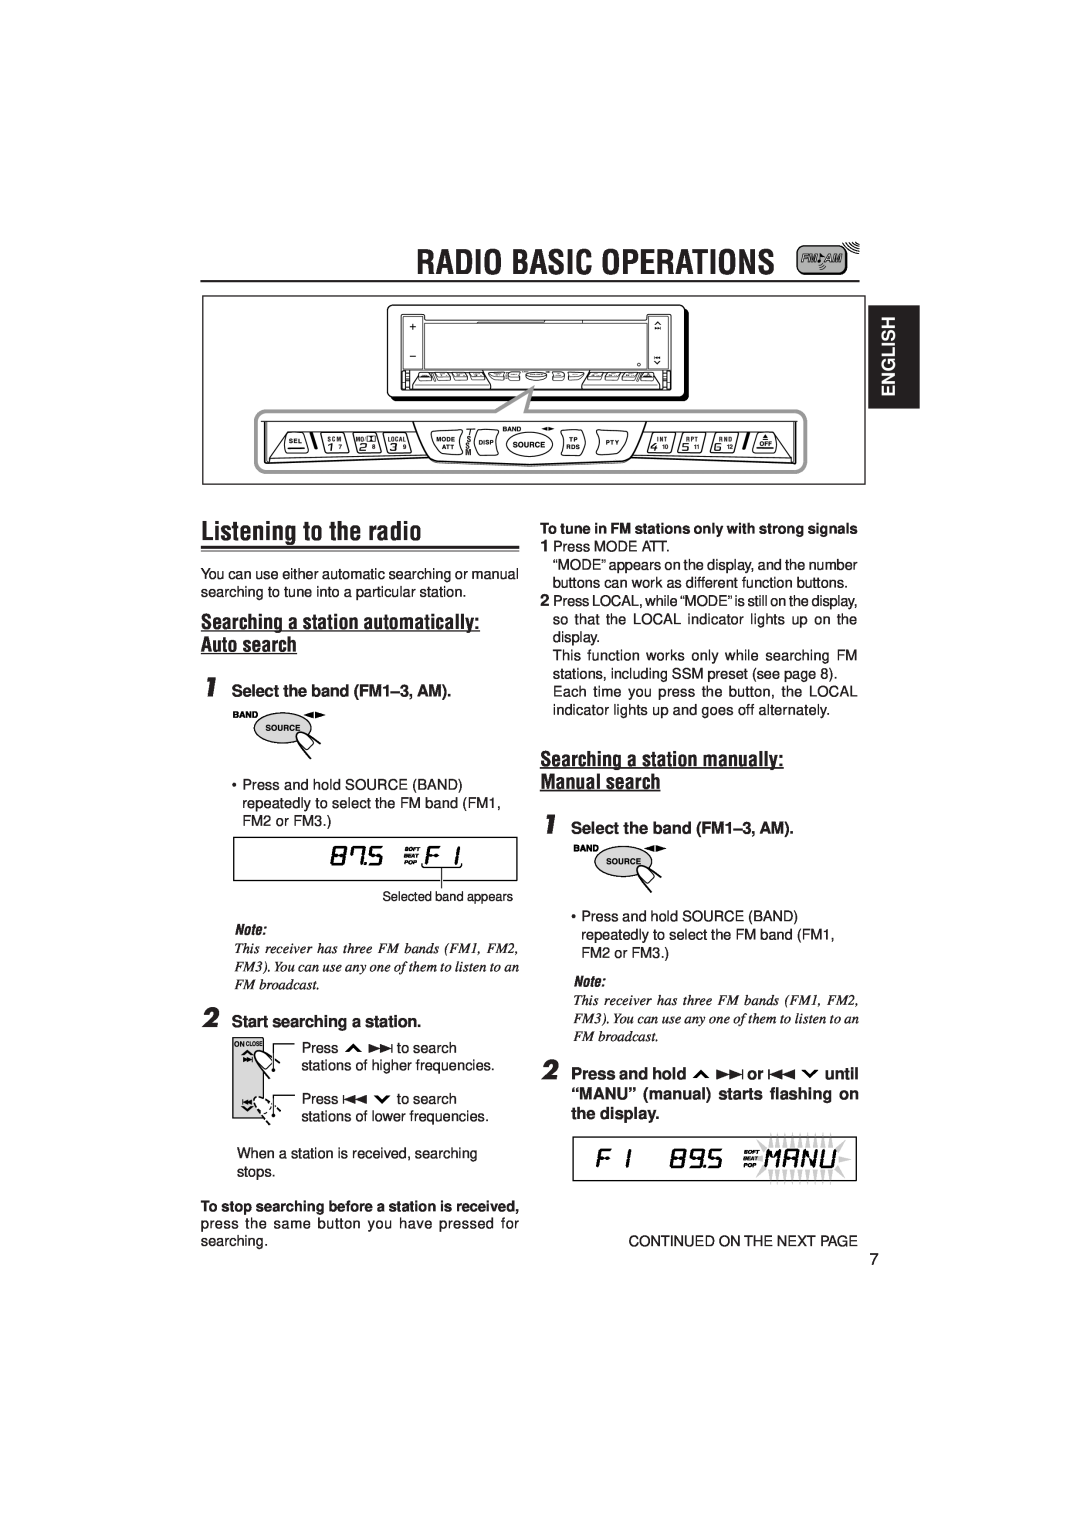 JVC KS-LX200R manual Radio Basic Operations, Listening to the radio, Searching a station automatically Auto search, English 